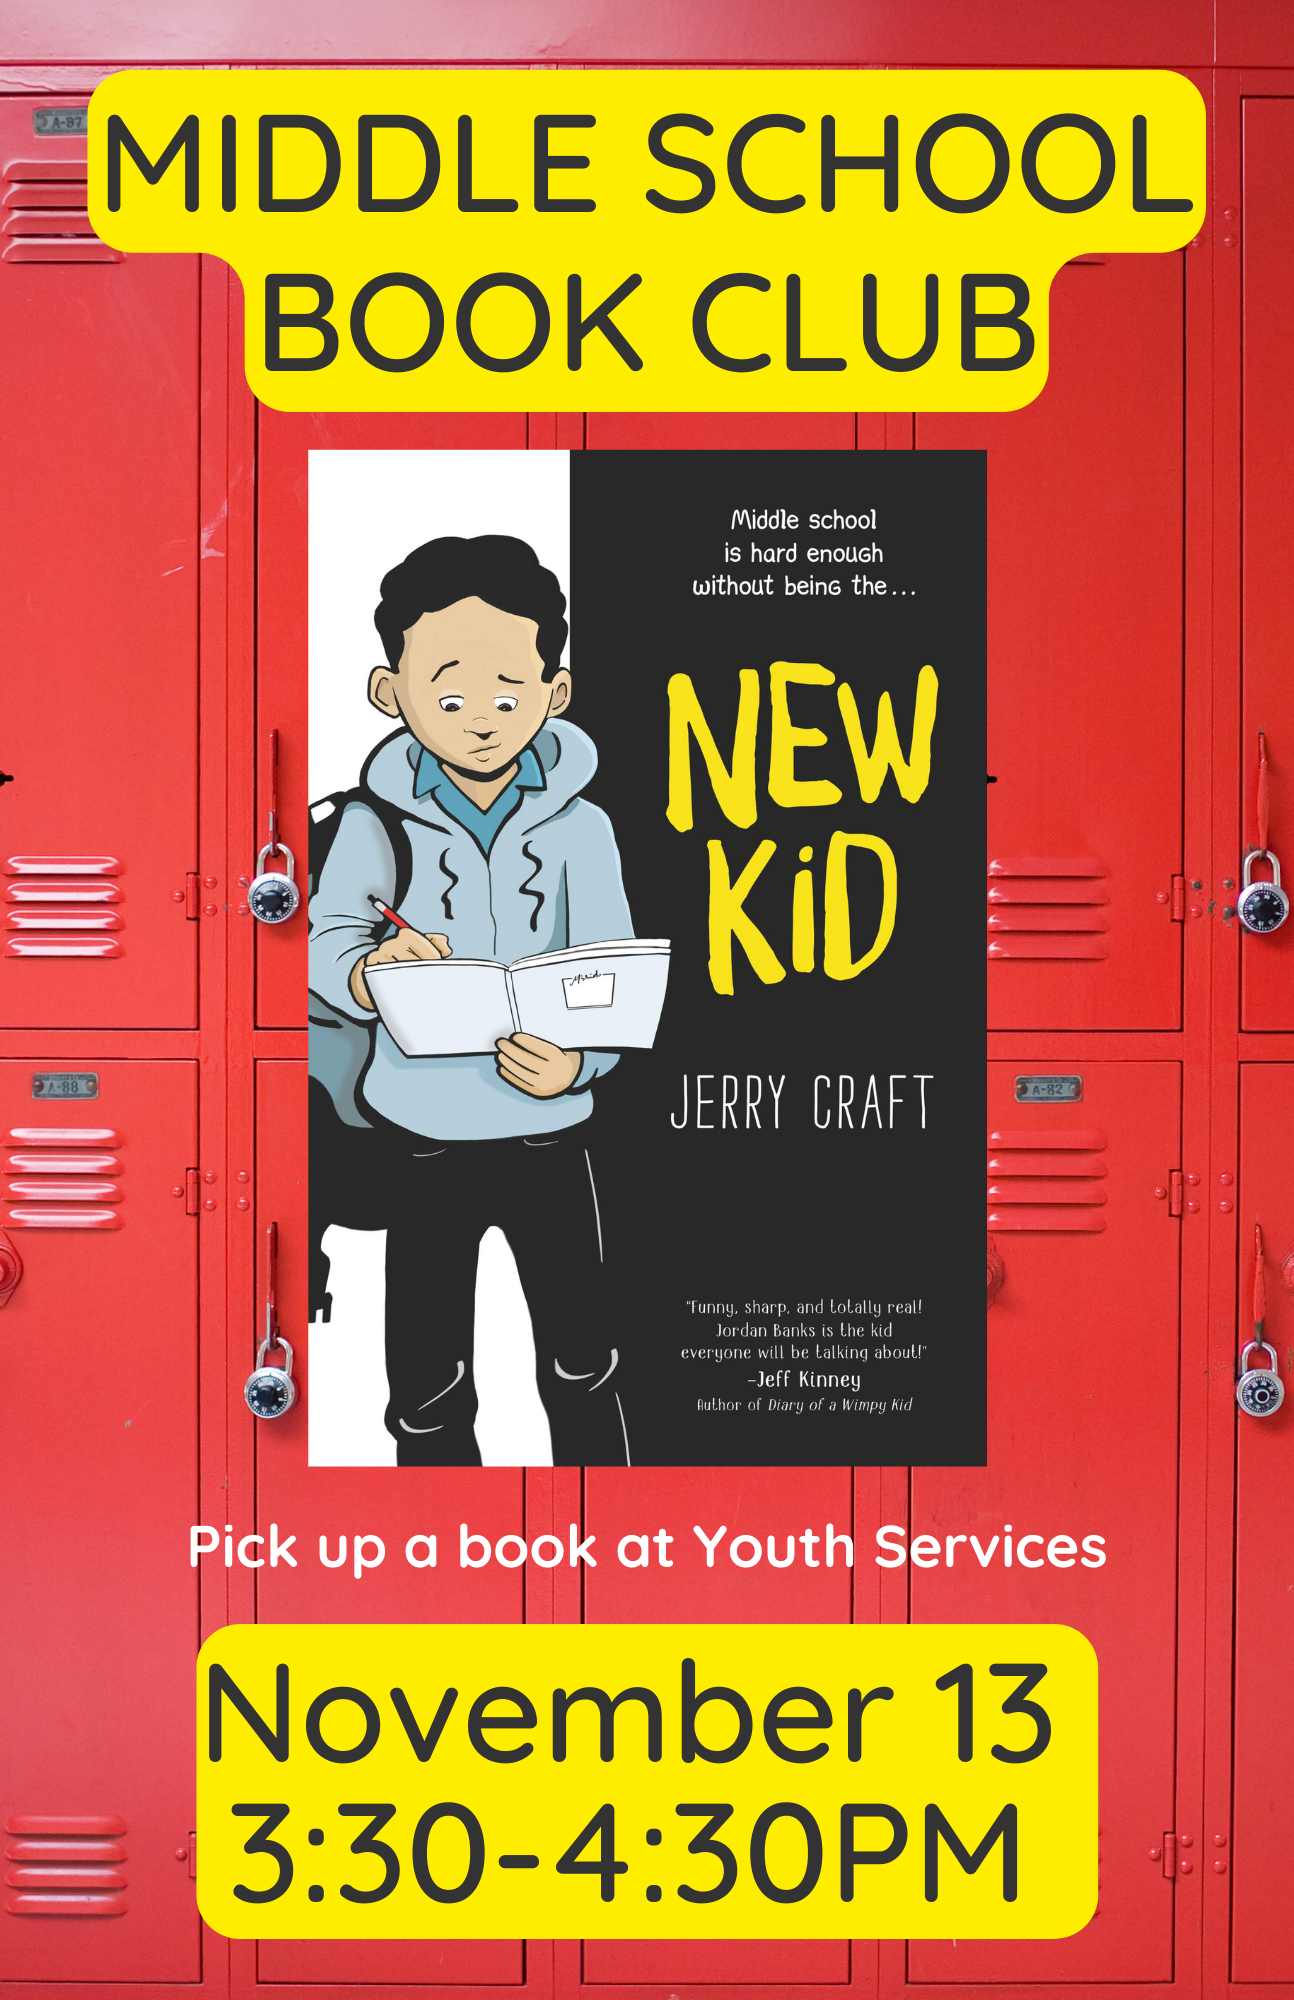 Red lockers in the background, with "Middle School Book Club" across the top, and "November 13, 3:30-4:30" across the bottom. In the center is the cover of the book "New Kid," which is half balck and white, with a brown-skinned boy on the cover holding an open book and a pencil. Below that it says "Pick up a book at Youth Services."